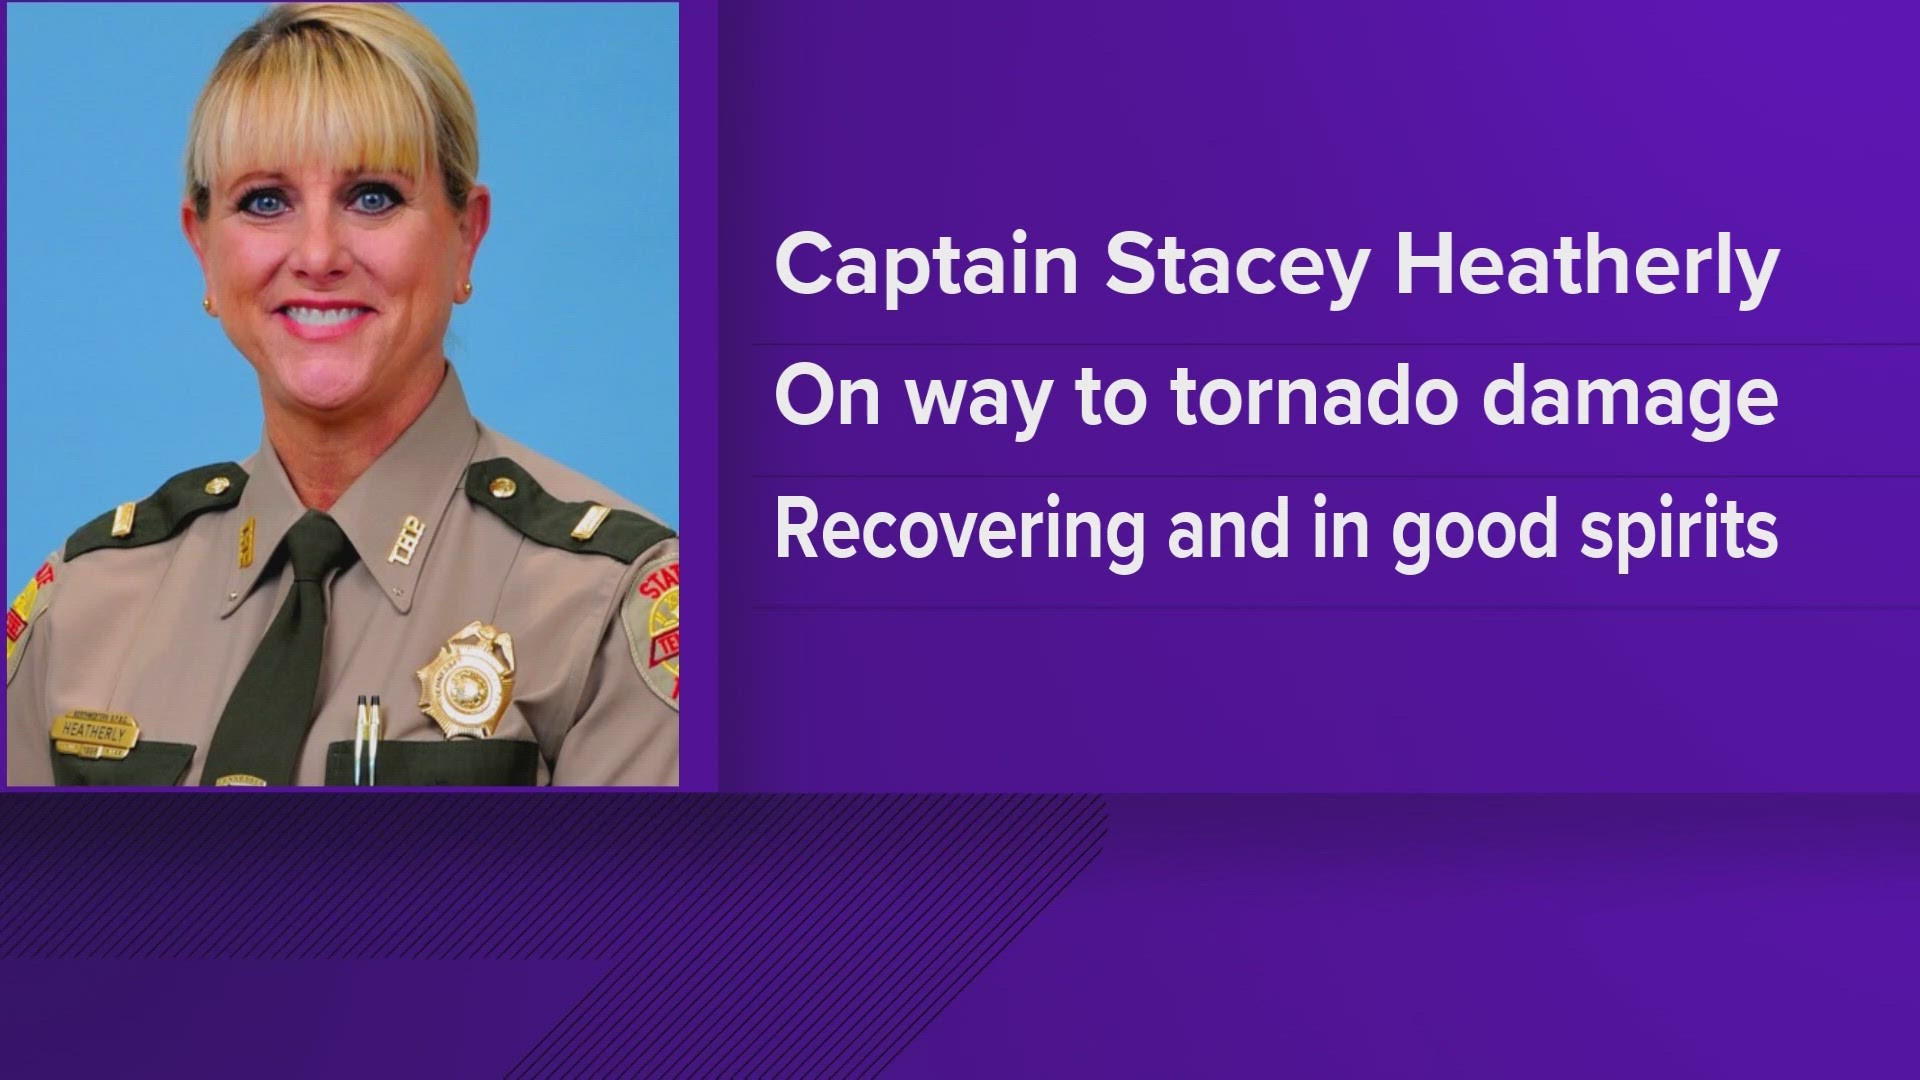 Capt. Stacey Heatherly is recovering after someone hit her vehicle head-on while she was responding to tornado damage in Morgan County on Tuesday, THP said.